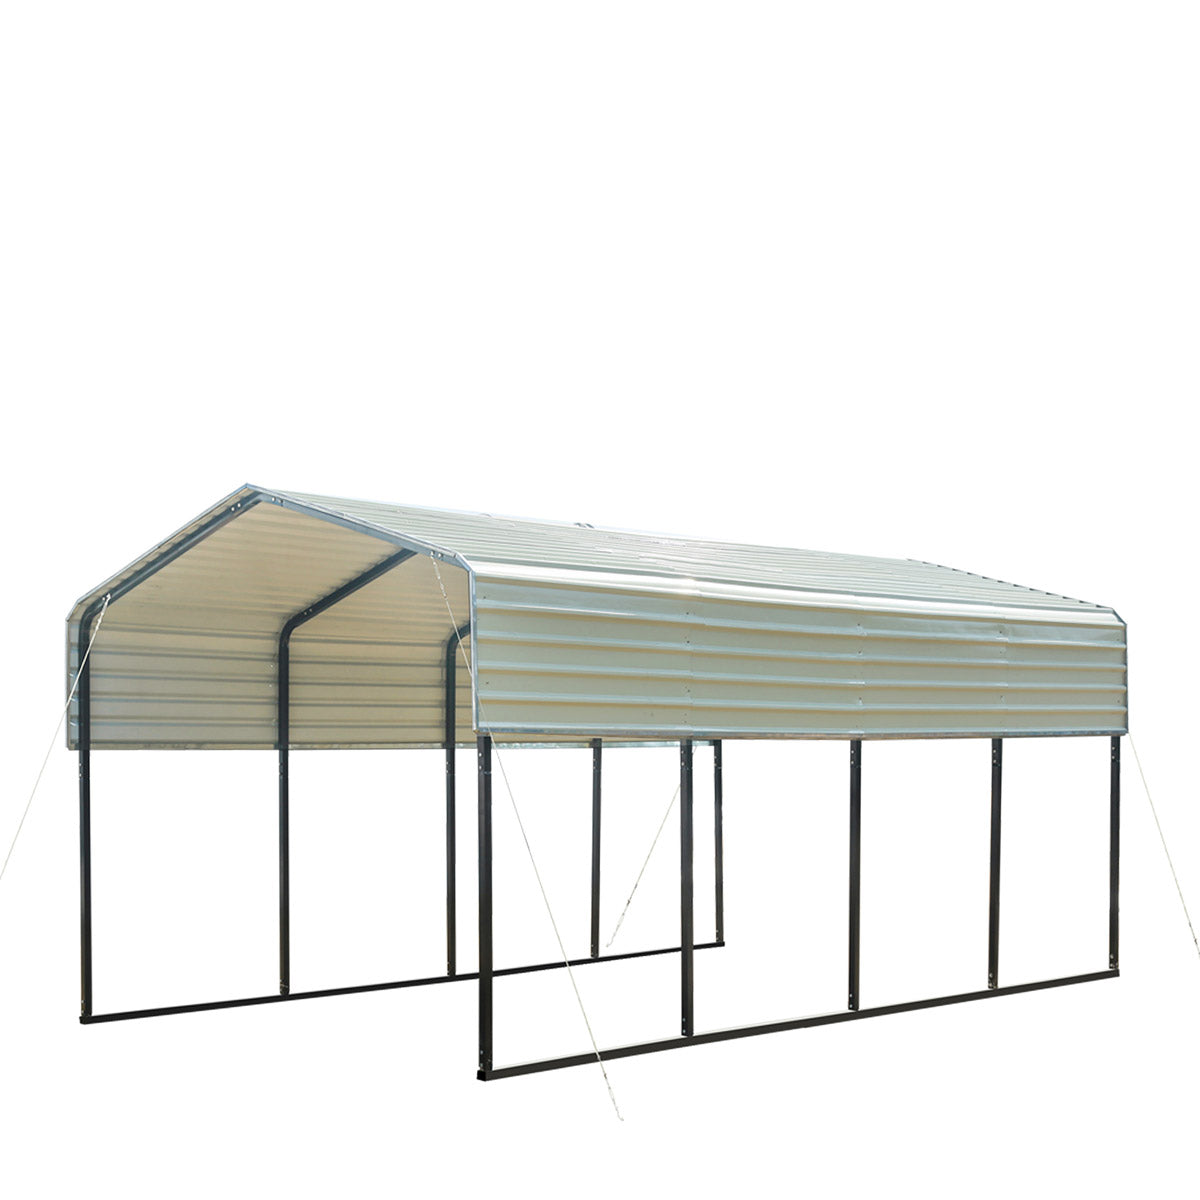 MELLCOM 12 x 20 ft Carport with Galvanized Steel Roof - 12' x 20' x 8.6'  Multi-Use Shelter, Sturdy Metal Carport for Cars, Boats, and Tractors